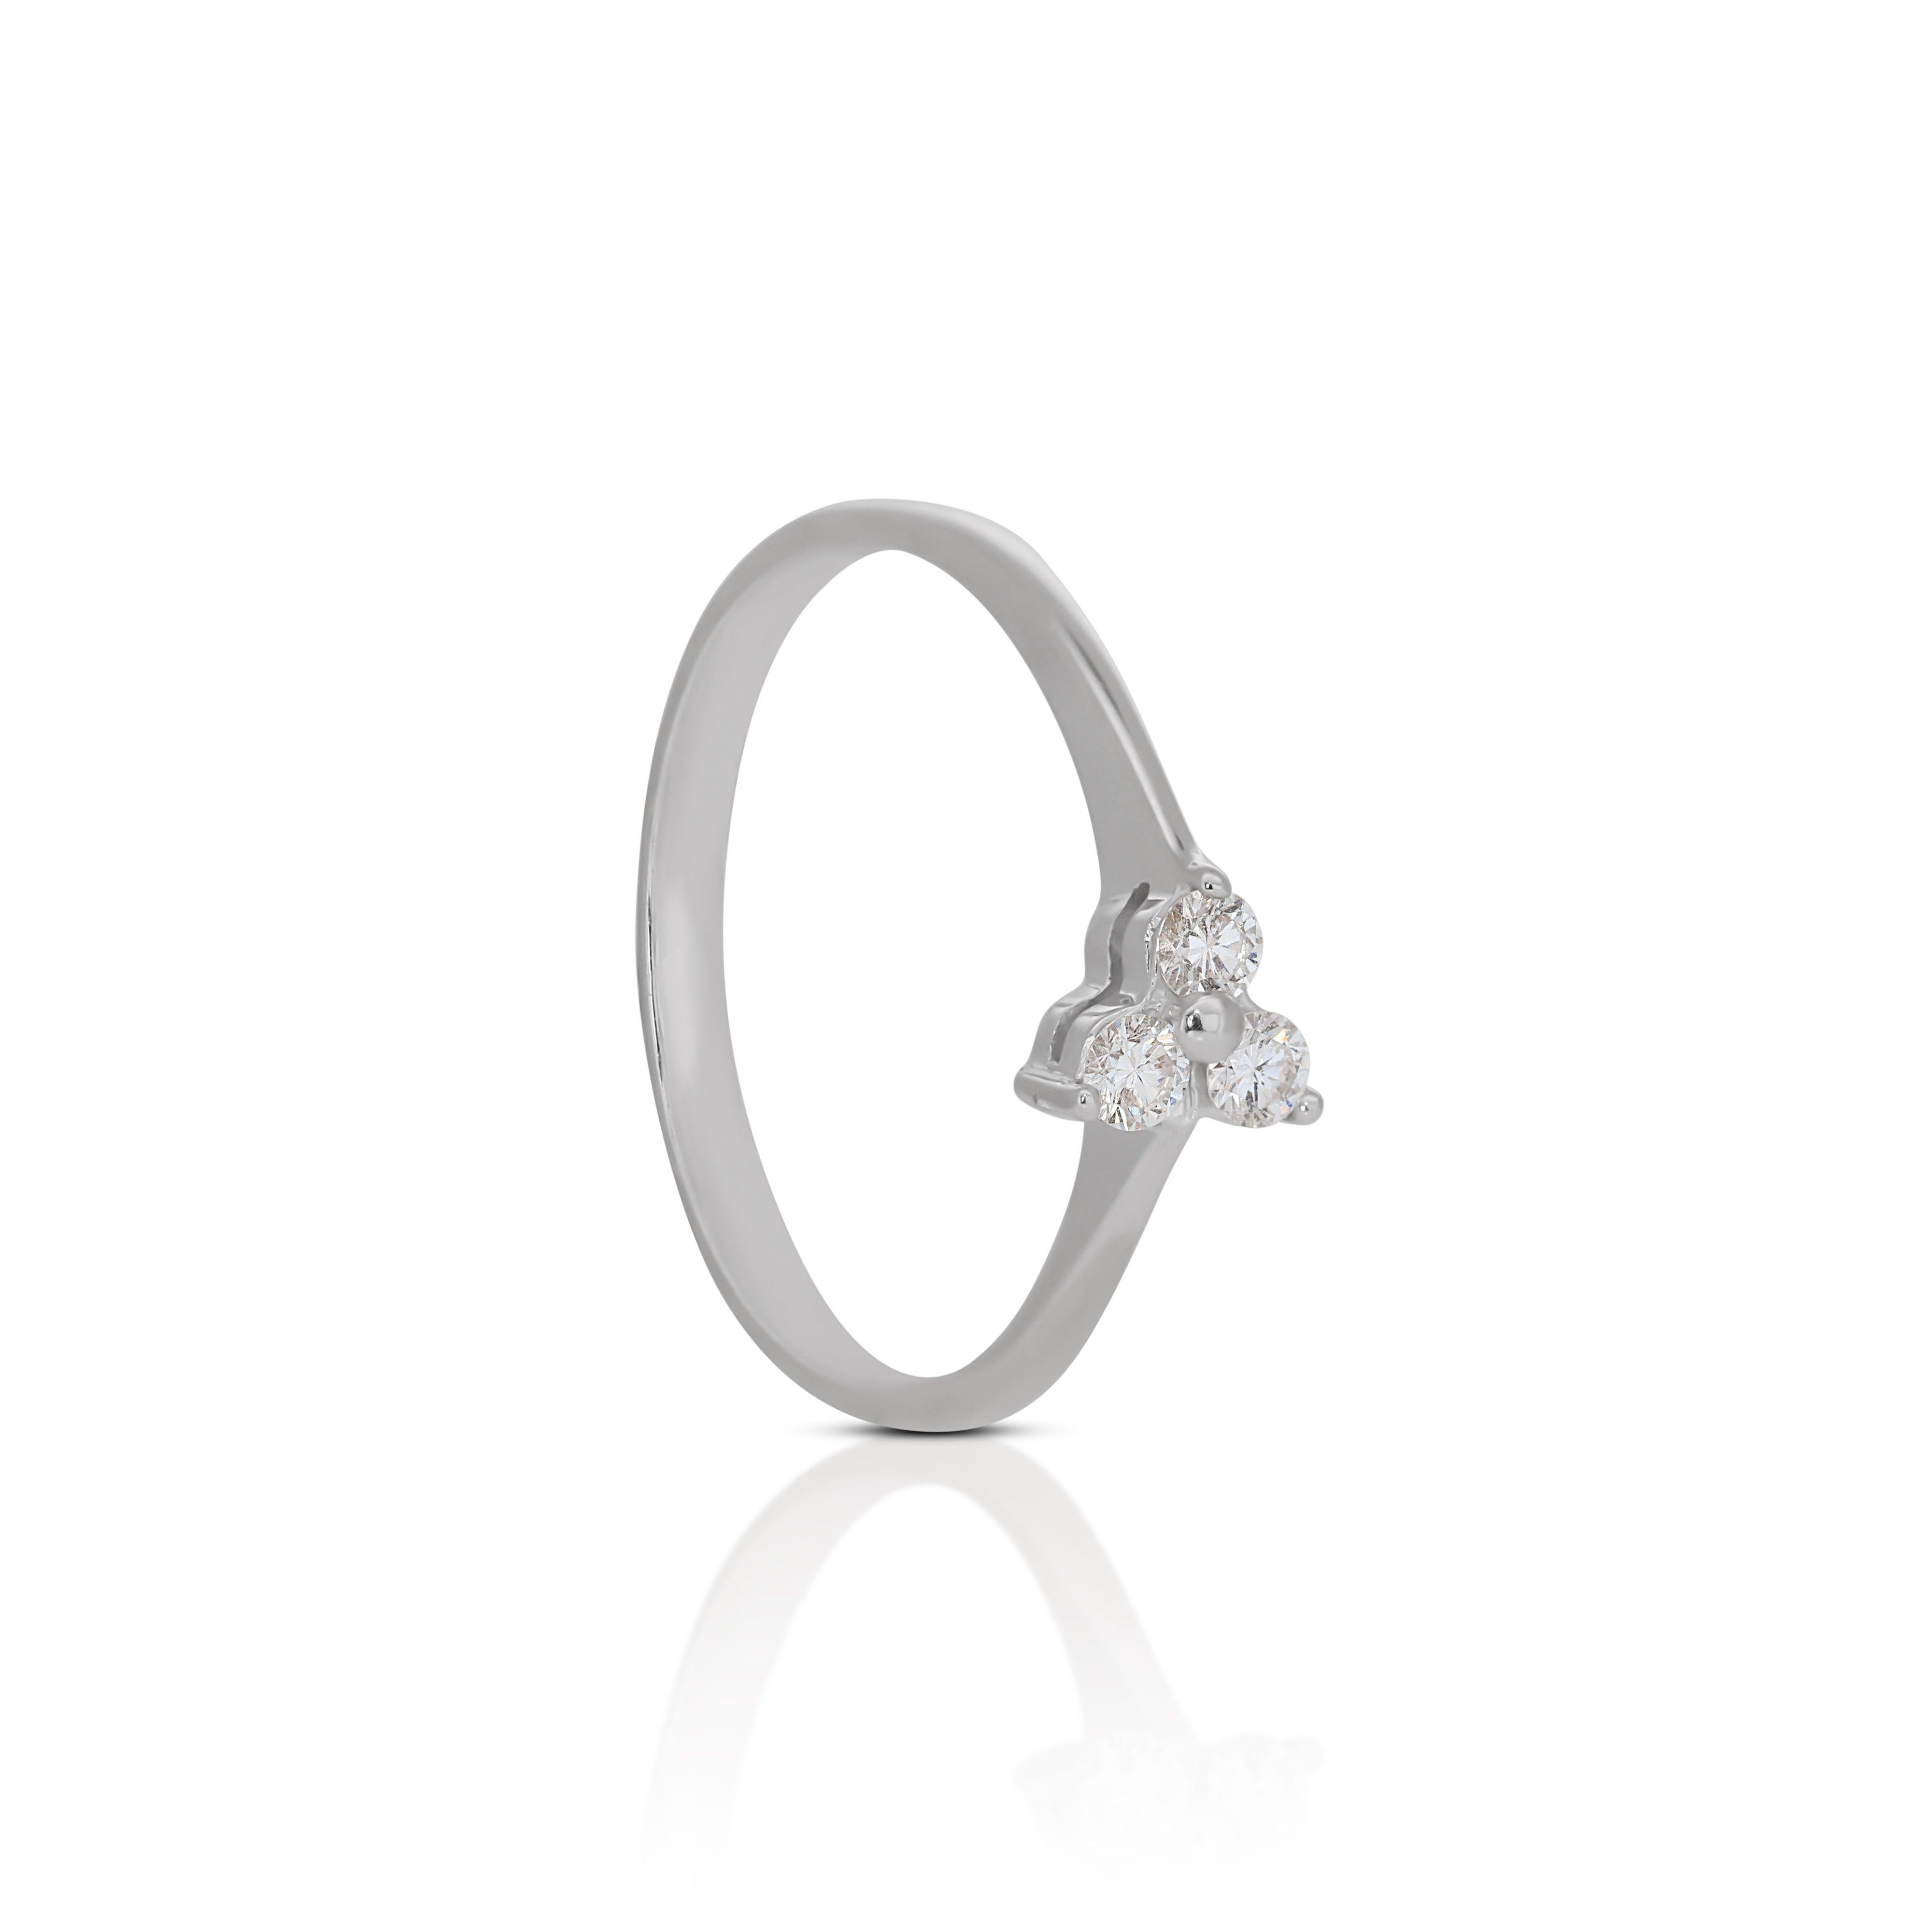 Beautiful 18k White Gold Leaf-shaped Diamond Ring with 0.15ct Natural Diamond For Sale 1